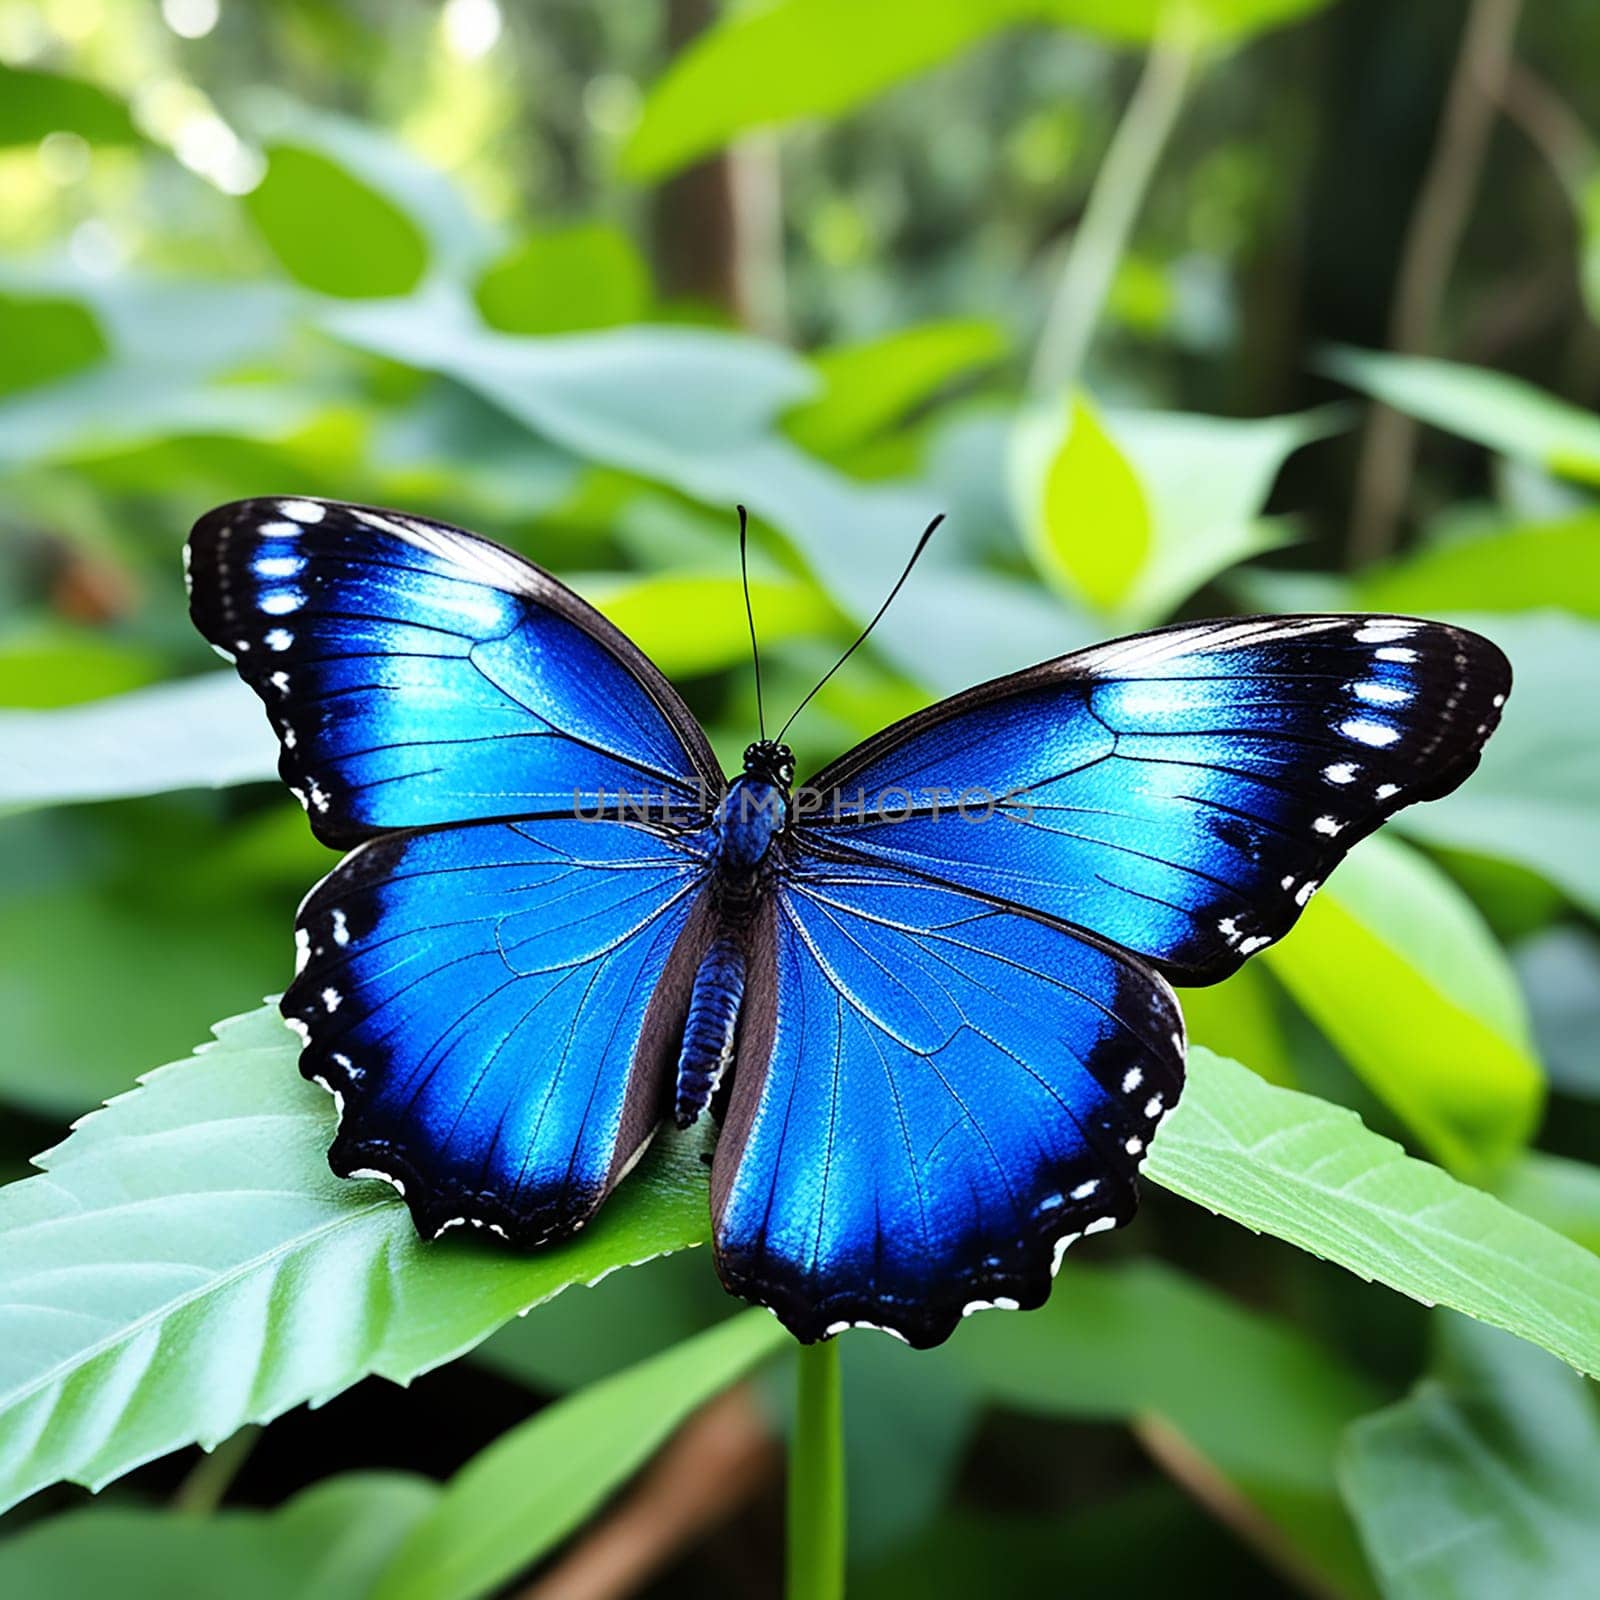 Blue Morpho Butterfly in the Amazon Rainforest